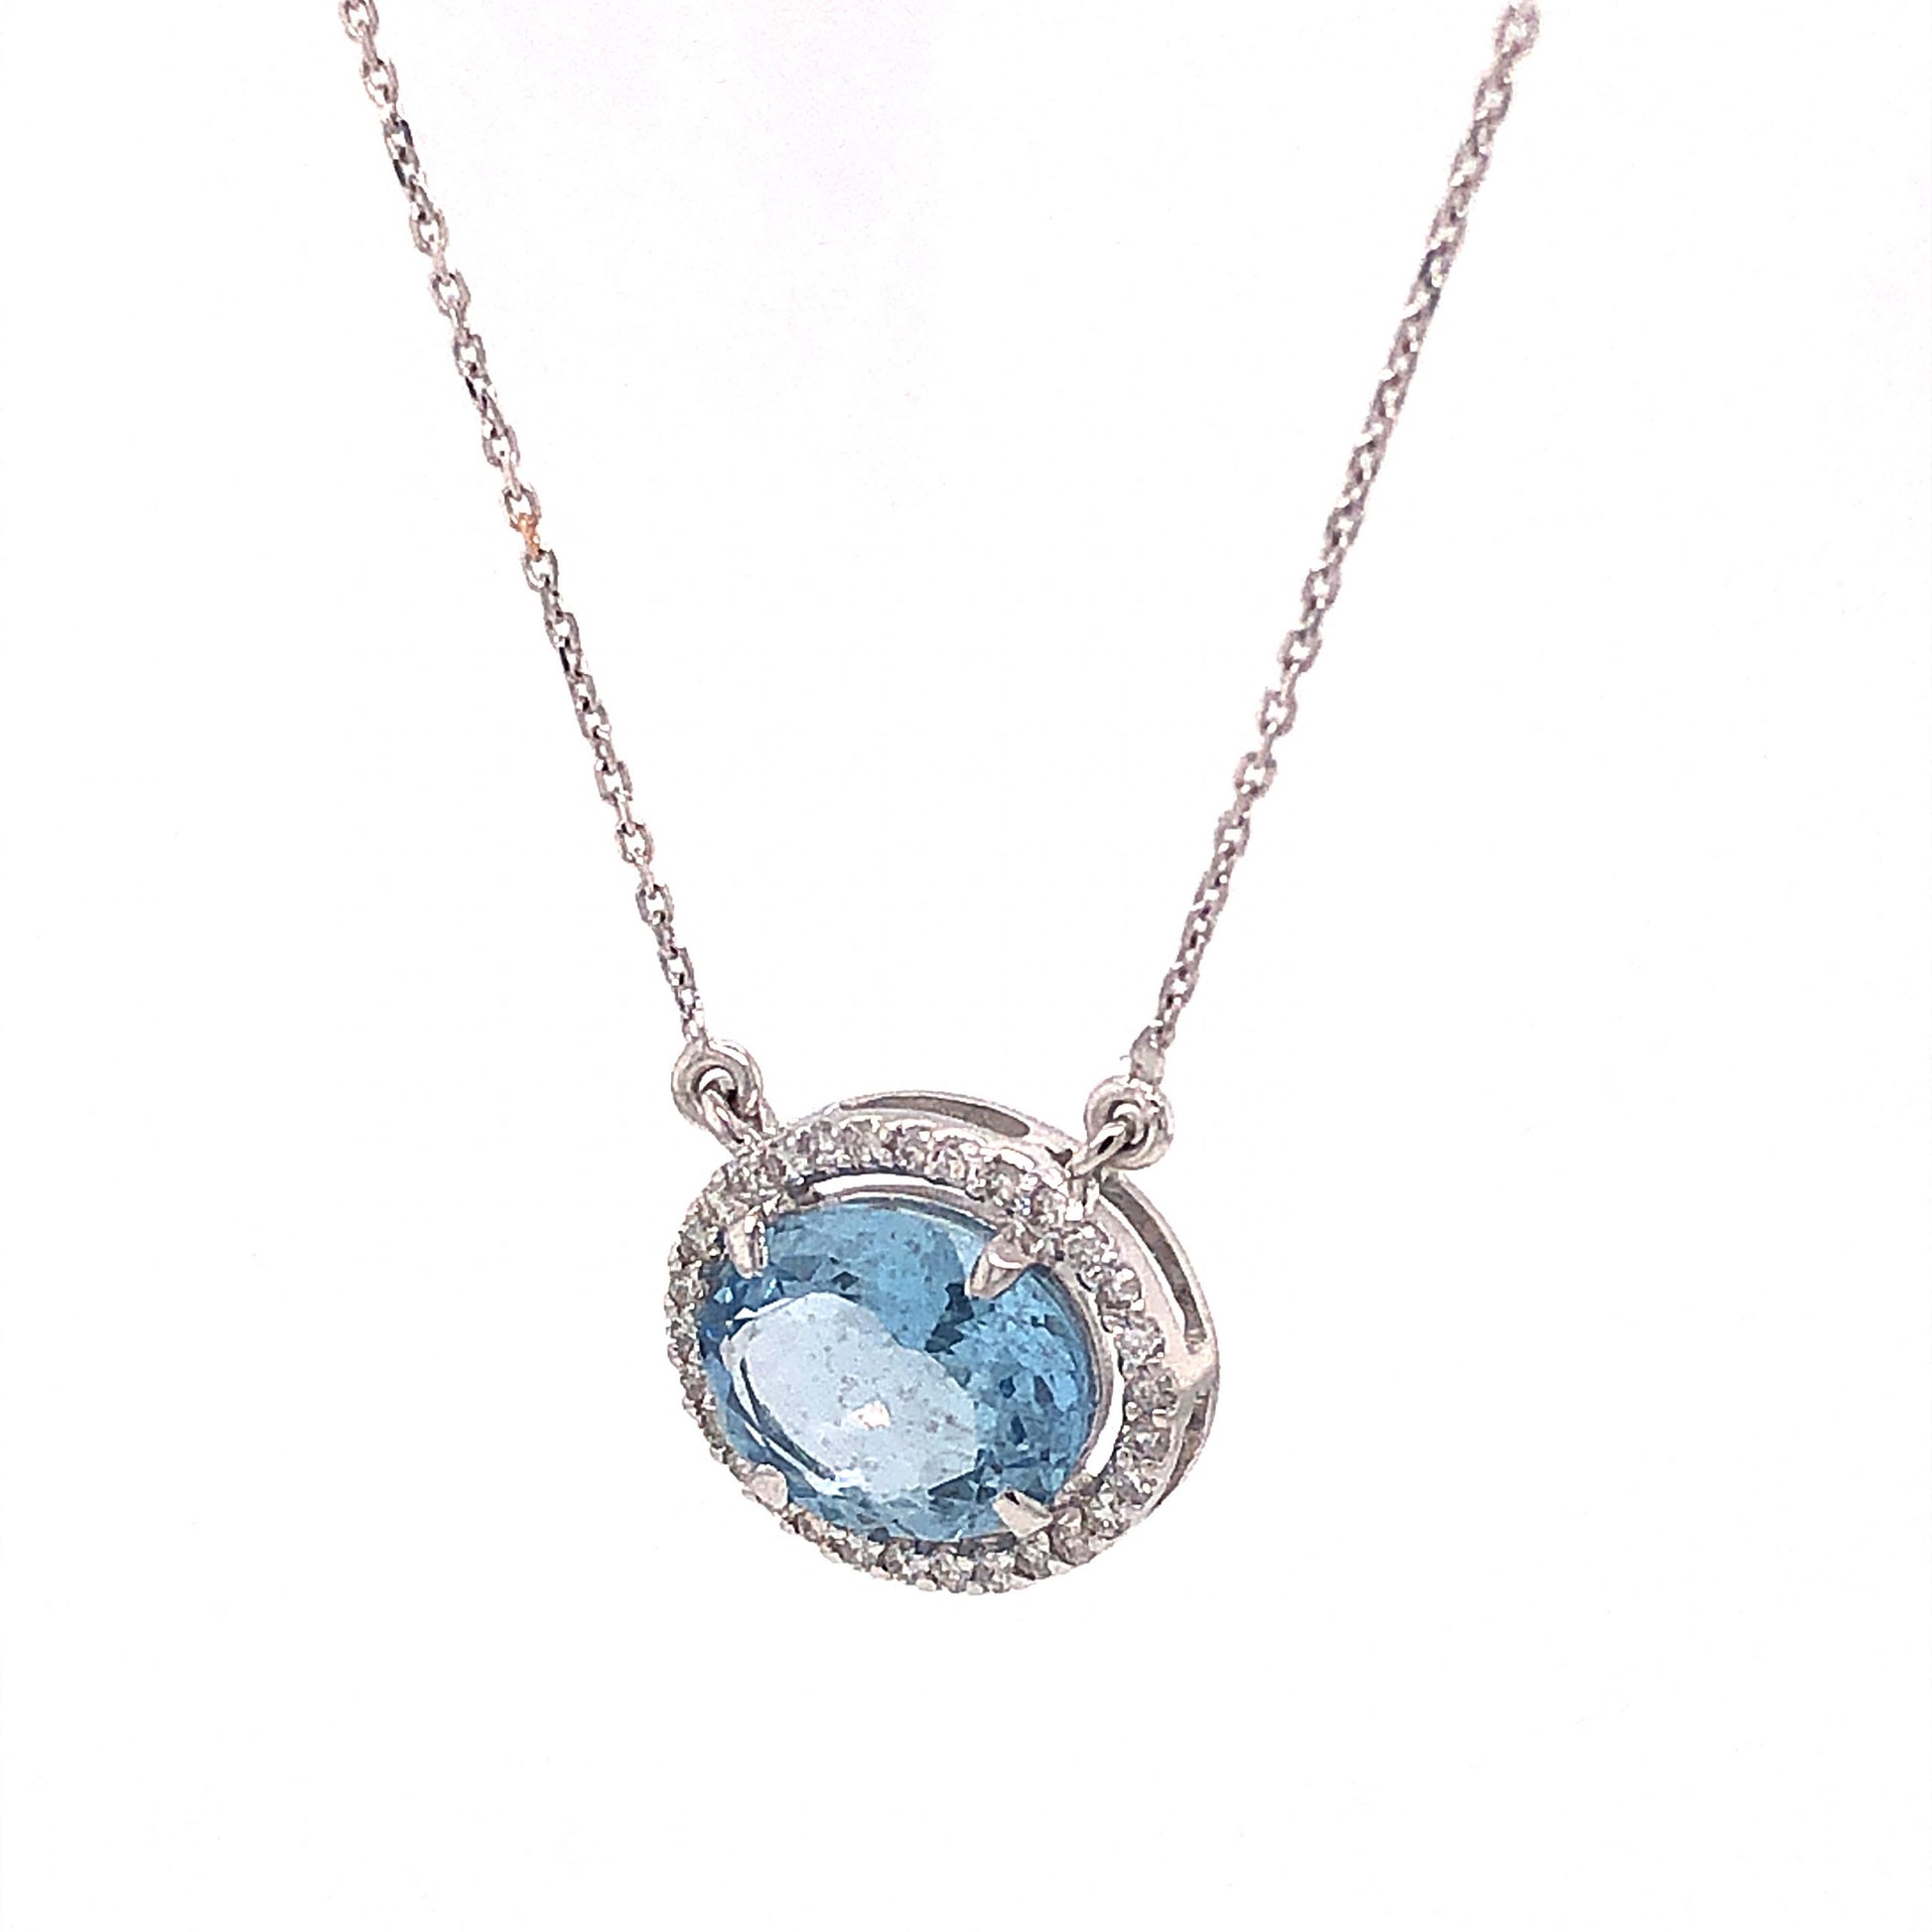 Oval Aquamarine Pendant Necklace in 18k White GoldComposition: 18 Karat White GoldTotal Diamond Weight: .30 ctTotal Gram Weight: 3.0 gInscription: 750